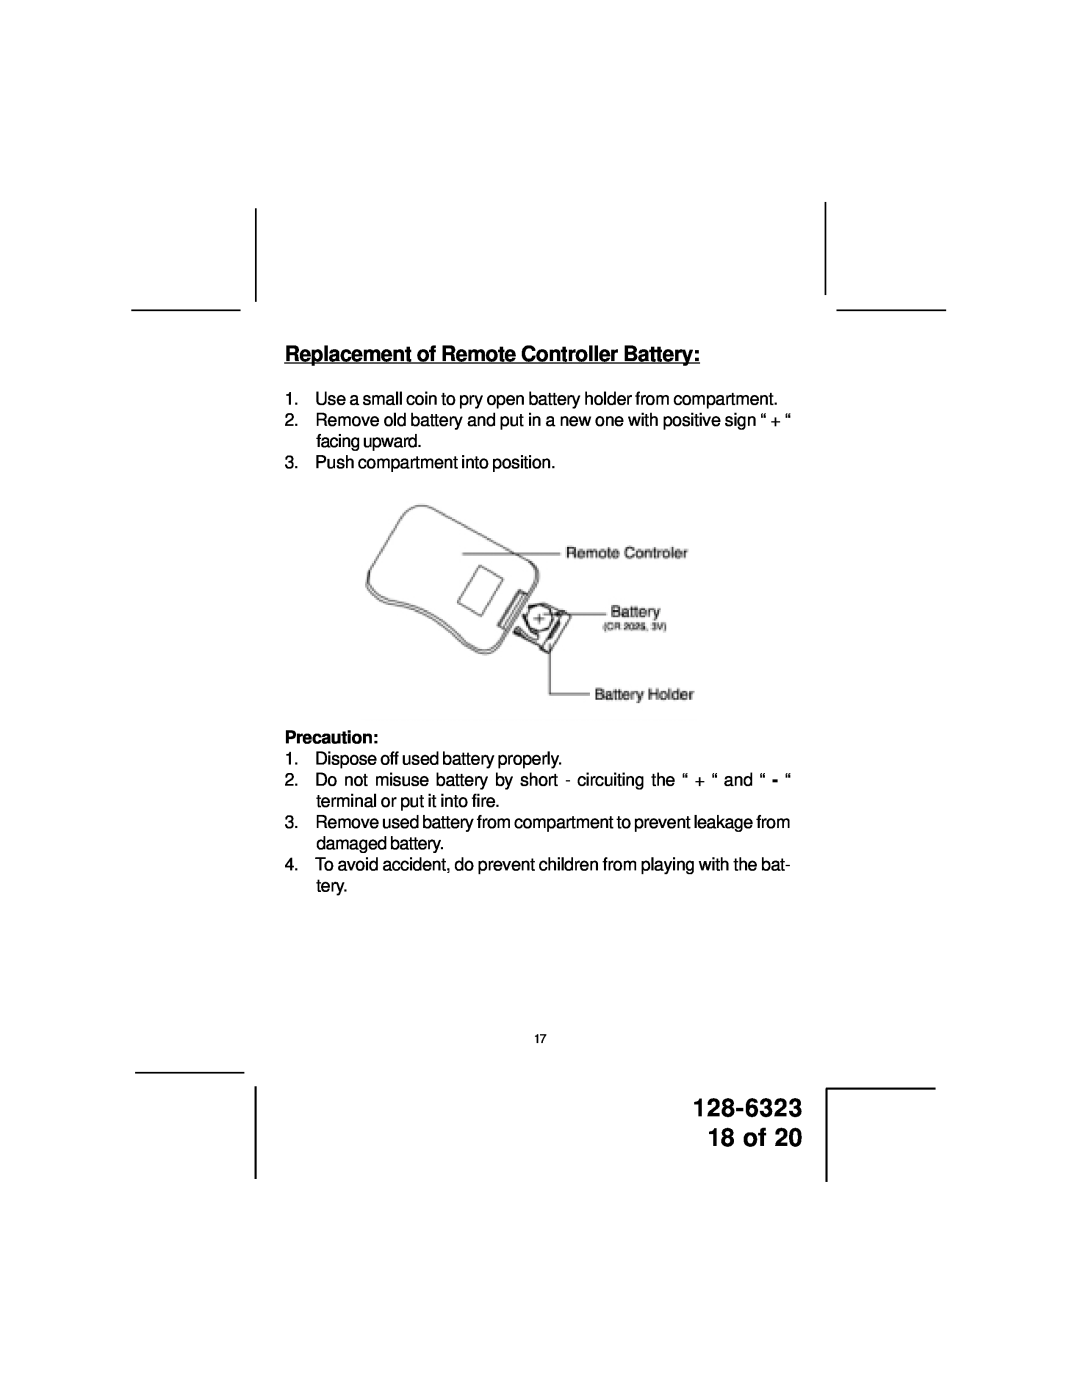 Audiovox LCM5643NP, LCM5043NP owner manual 128-6323 18 of, Replacement of Remote Controller Battery, Precaution 